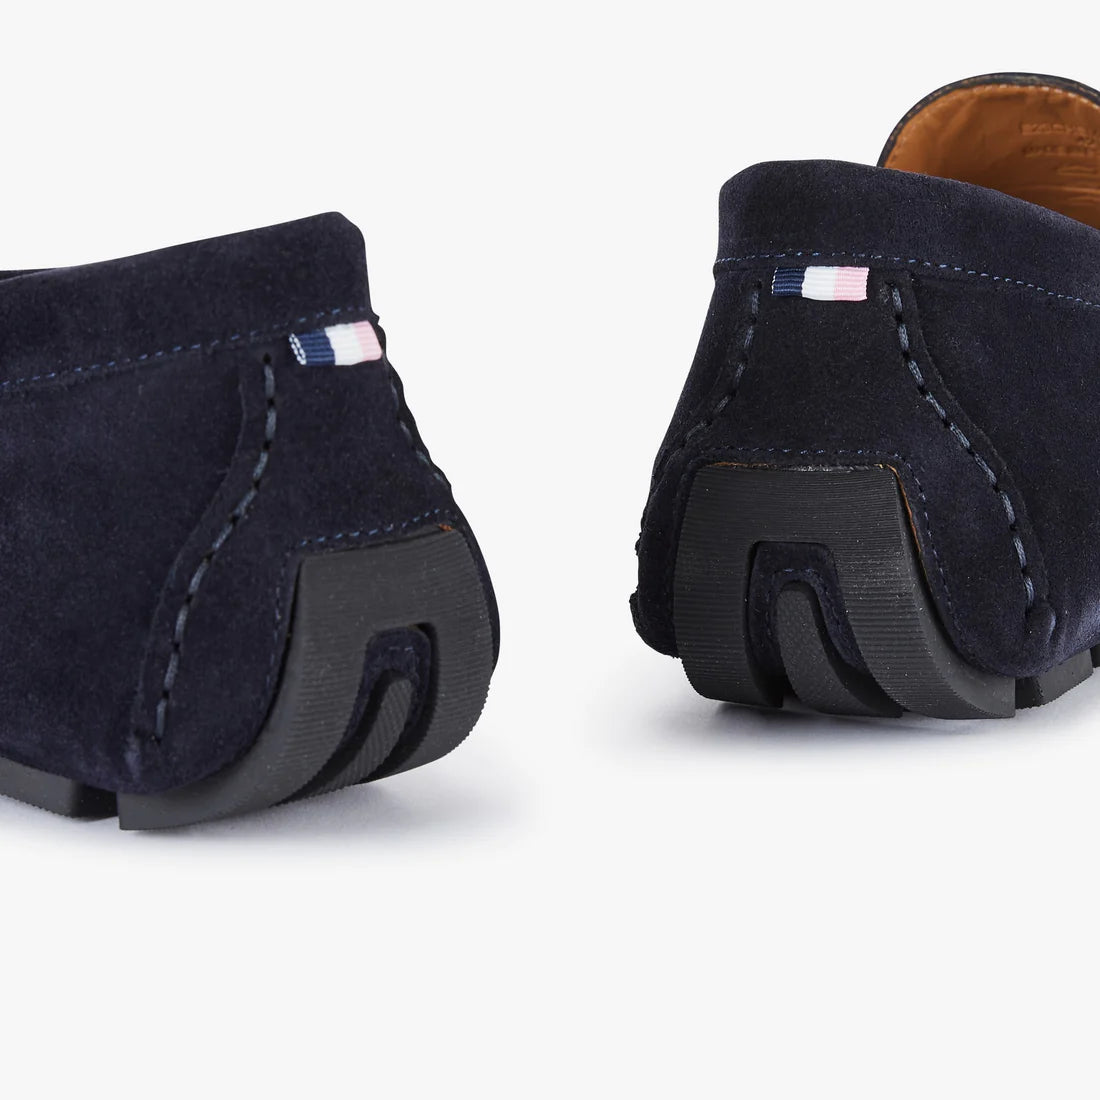 Driving shoe in navy by Eden Park